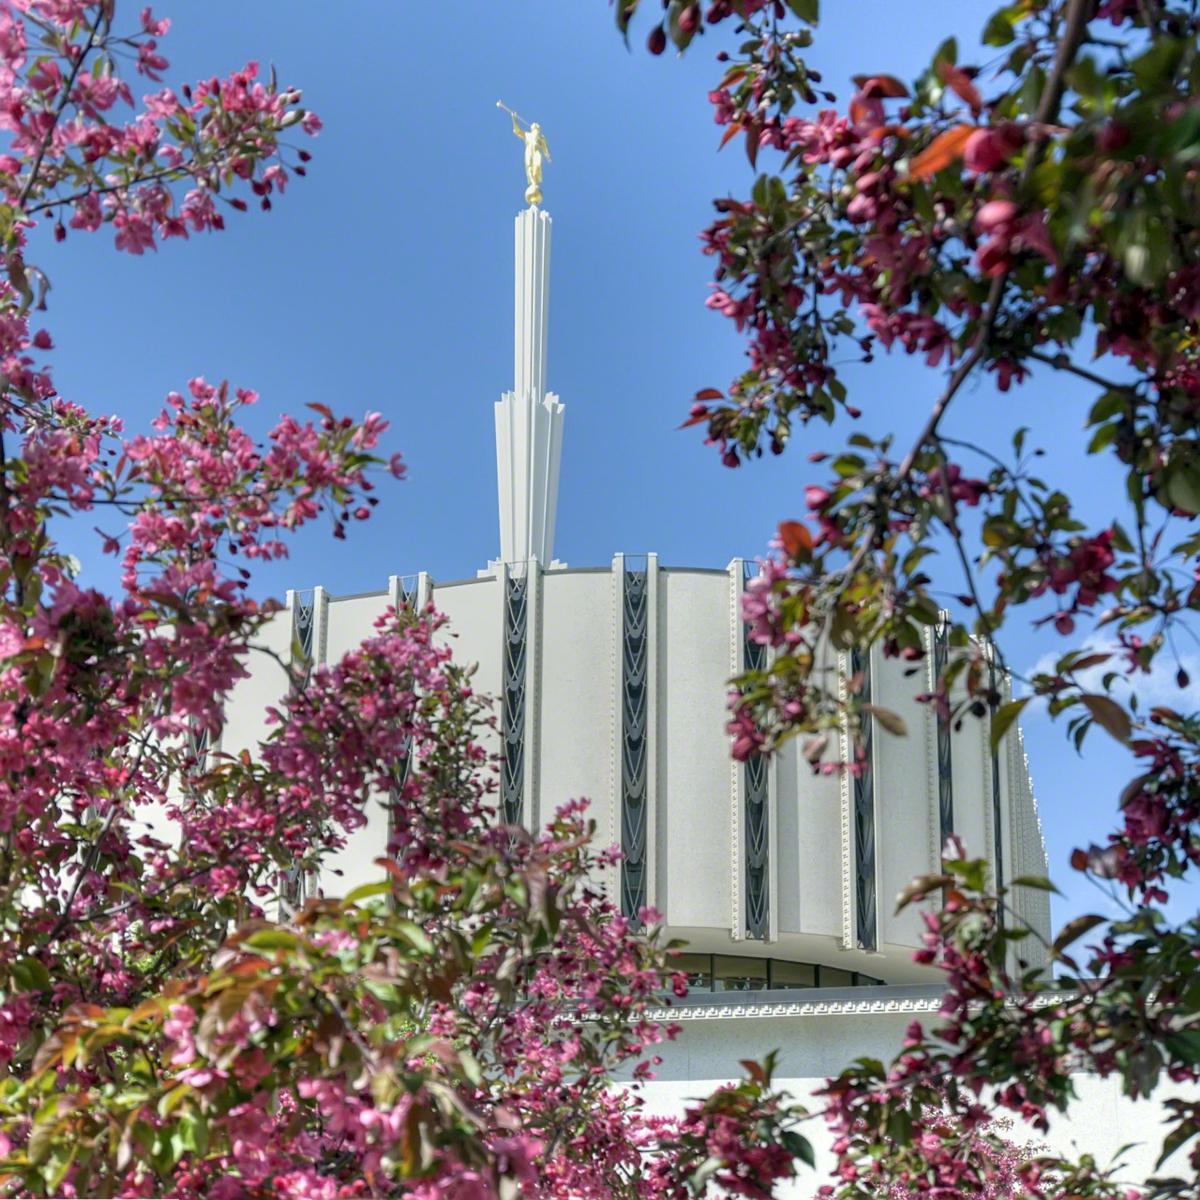 The exterior of the original Ogden Utah Temple, dedicated in 1972, that had a flat, round base with a spire in the center, with purple flowers near the camera.